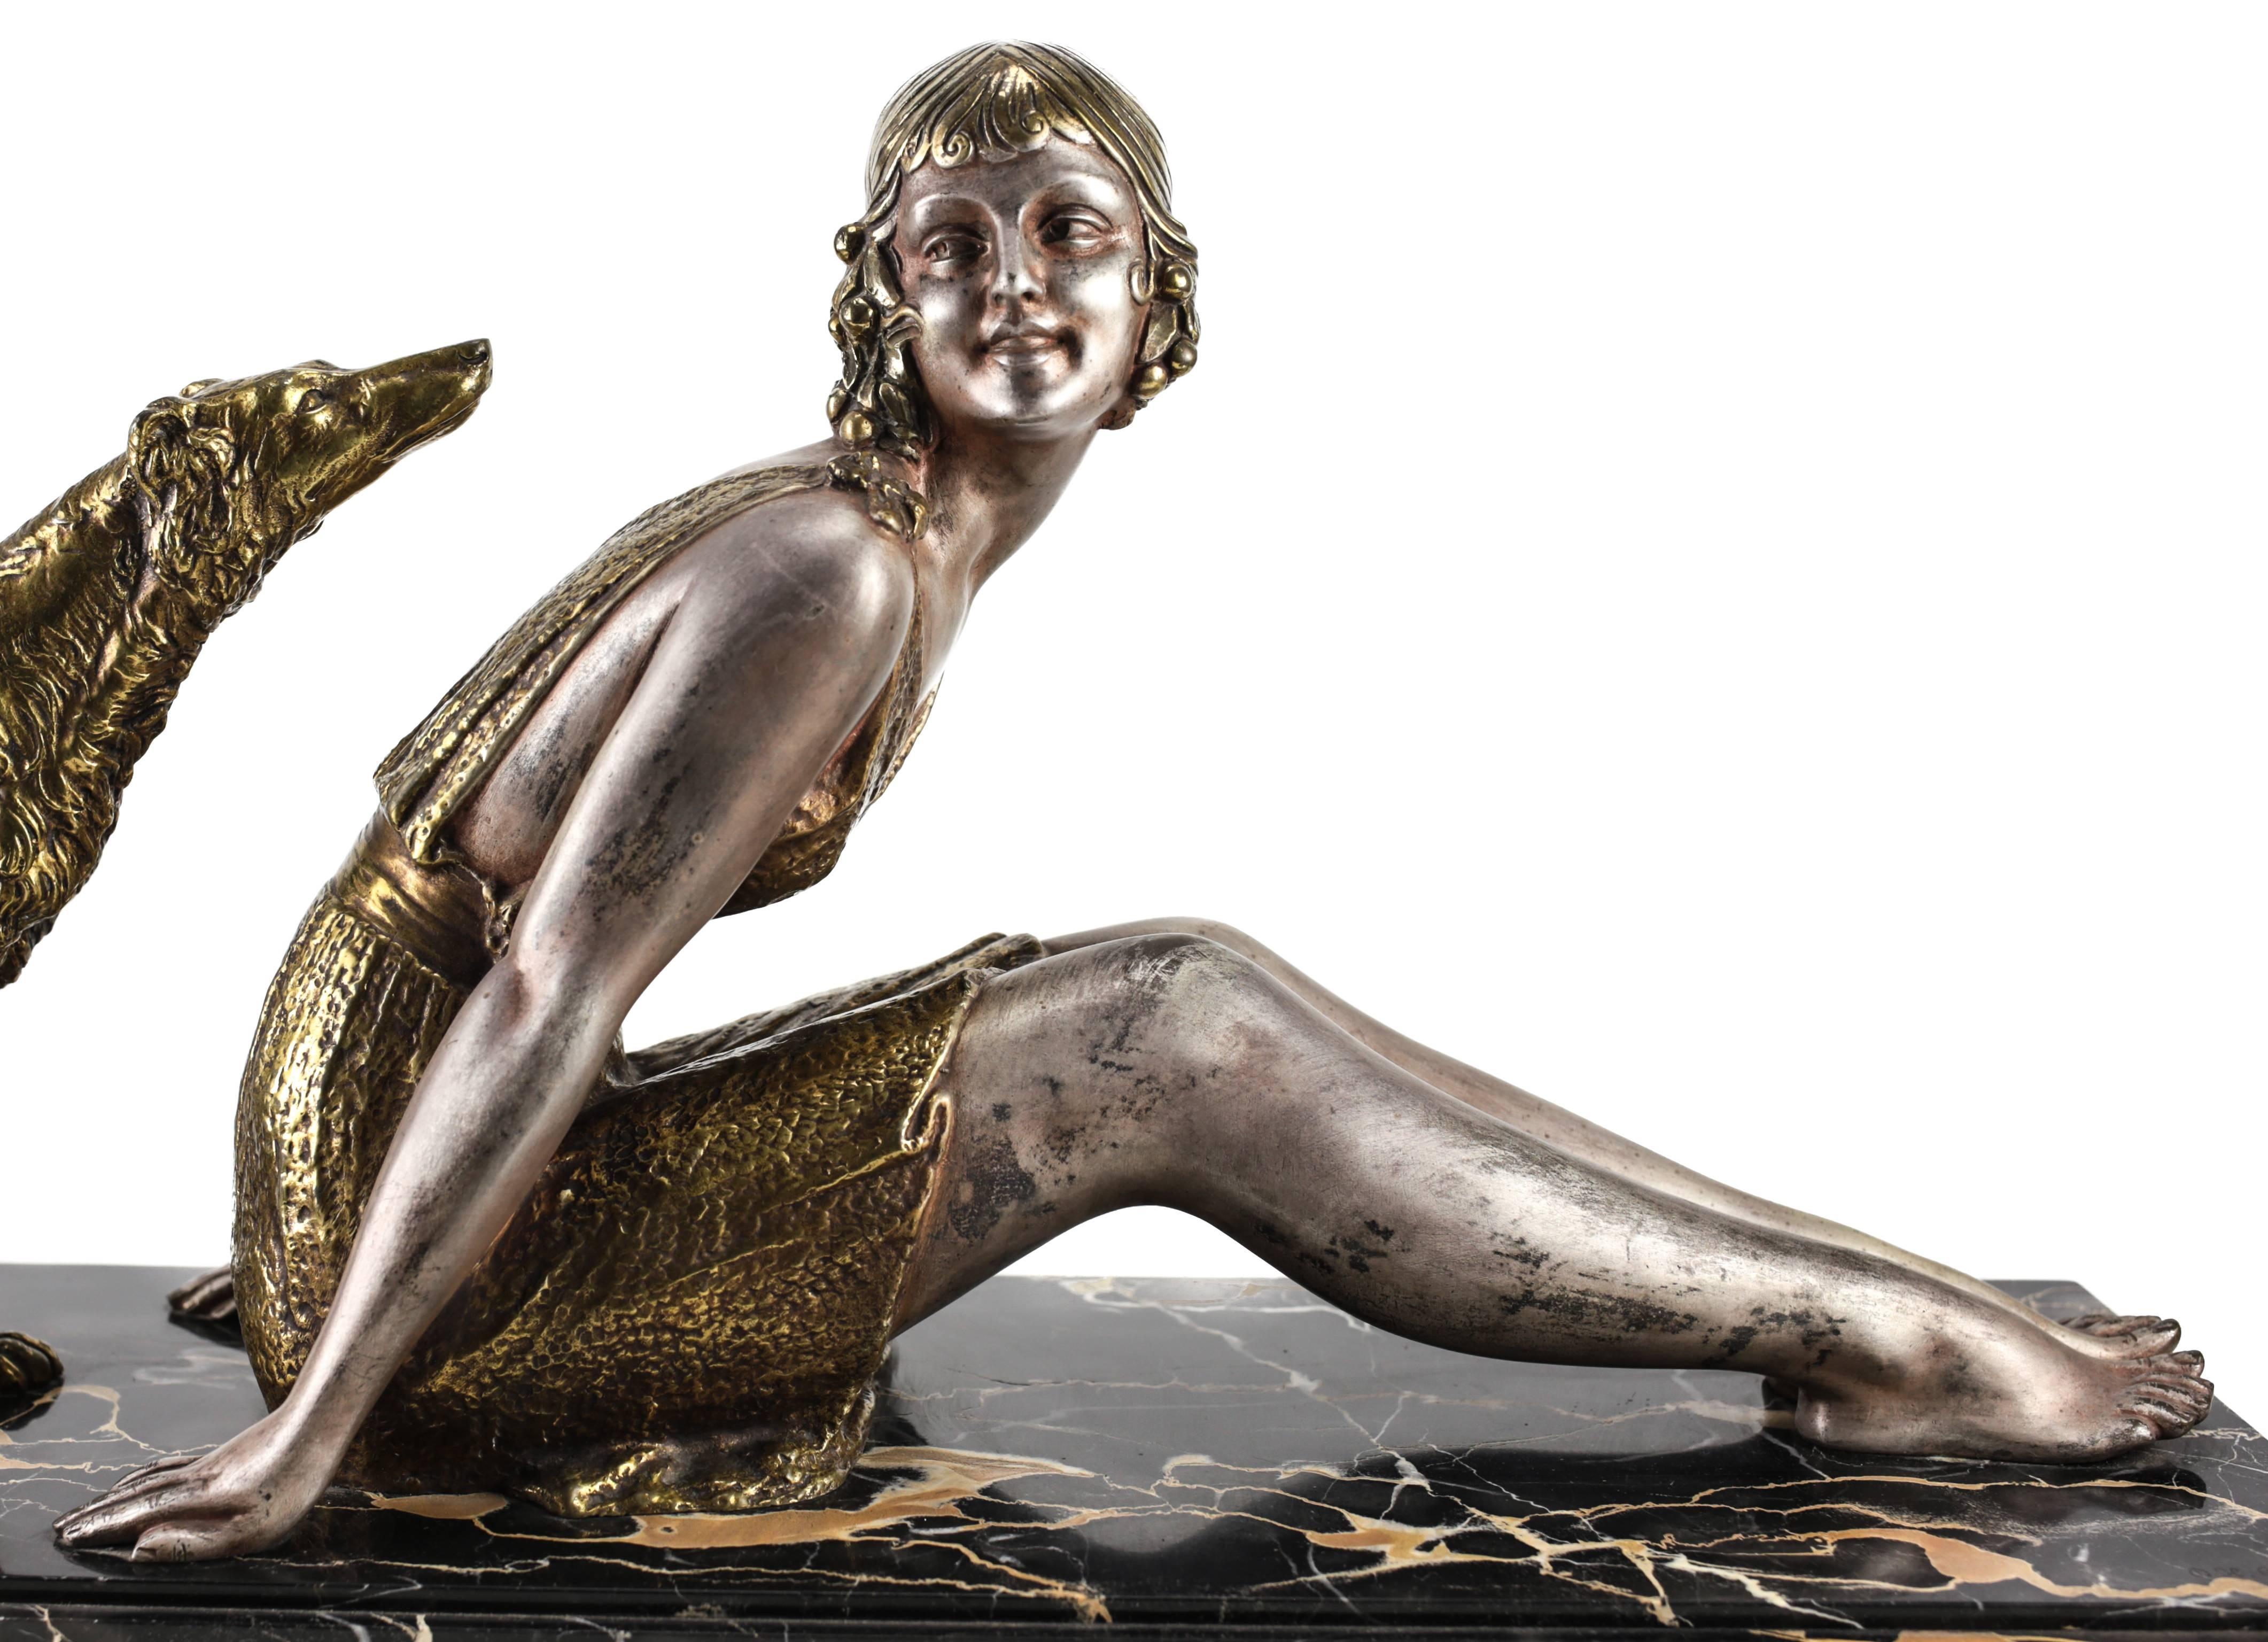 An attractive Art Deco silver patinated and gilt bronze sculpture of a seated woman, embodying a flapper, cheerfully posing with her endearing borzoi dog, mounted on a portor marble base. Inscribed foundry mark for 